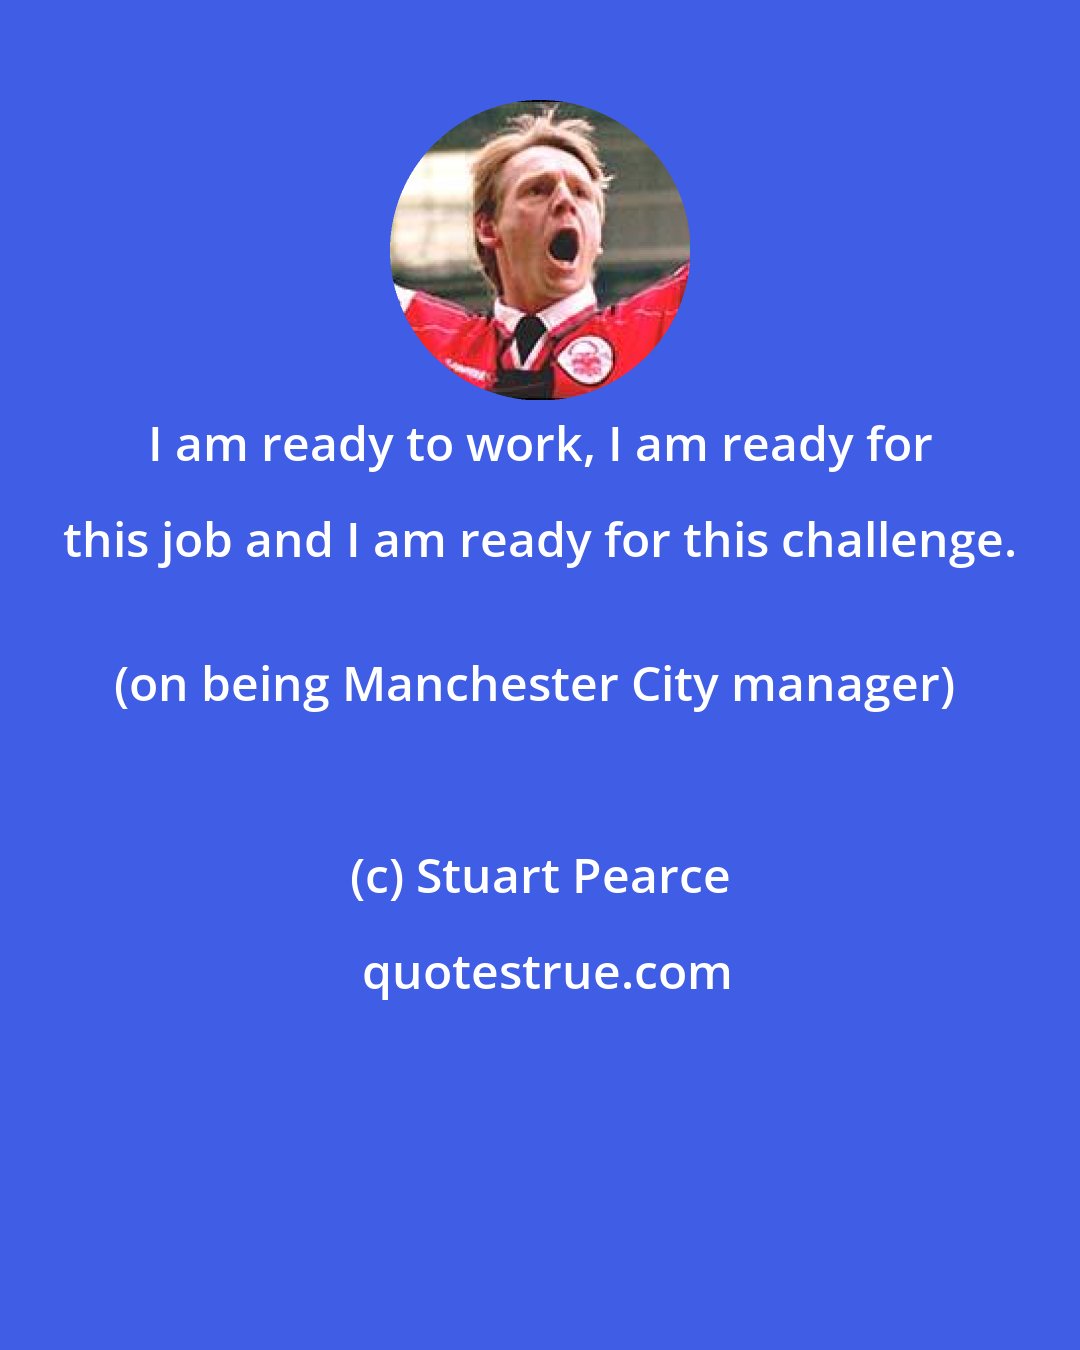 Stuart Pearce: I am ready to work, I am ready for this job and I am ready for this challenge. 
(on being Manchester City manager)